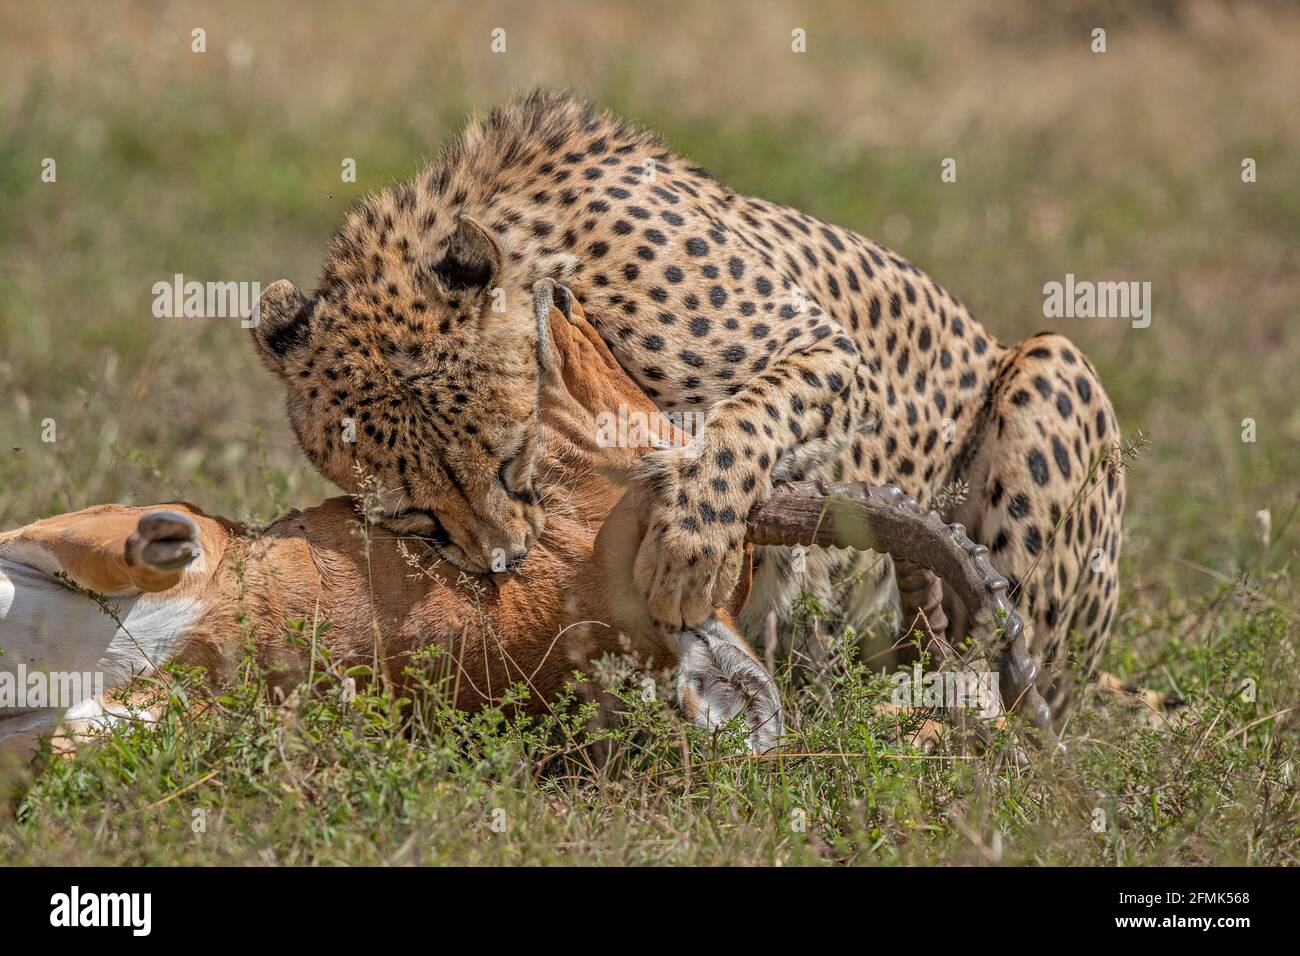 A cheetah sinks its teeth into an impala's neck after hunting it down. MASAI MARA, KENYA: GRUESOME photos have captured a group of blood-soaked cheeta Stock Photo